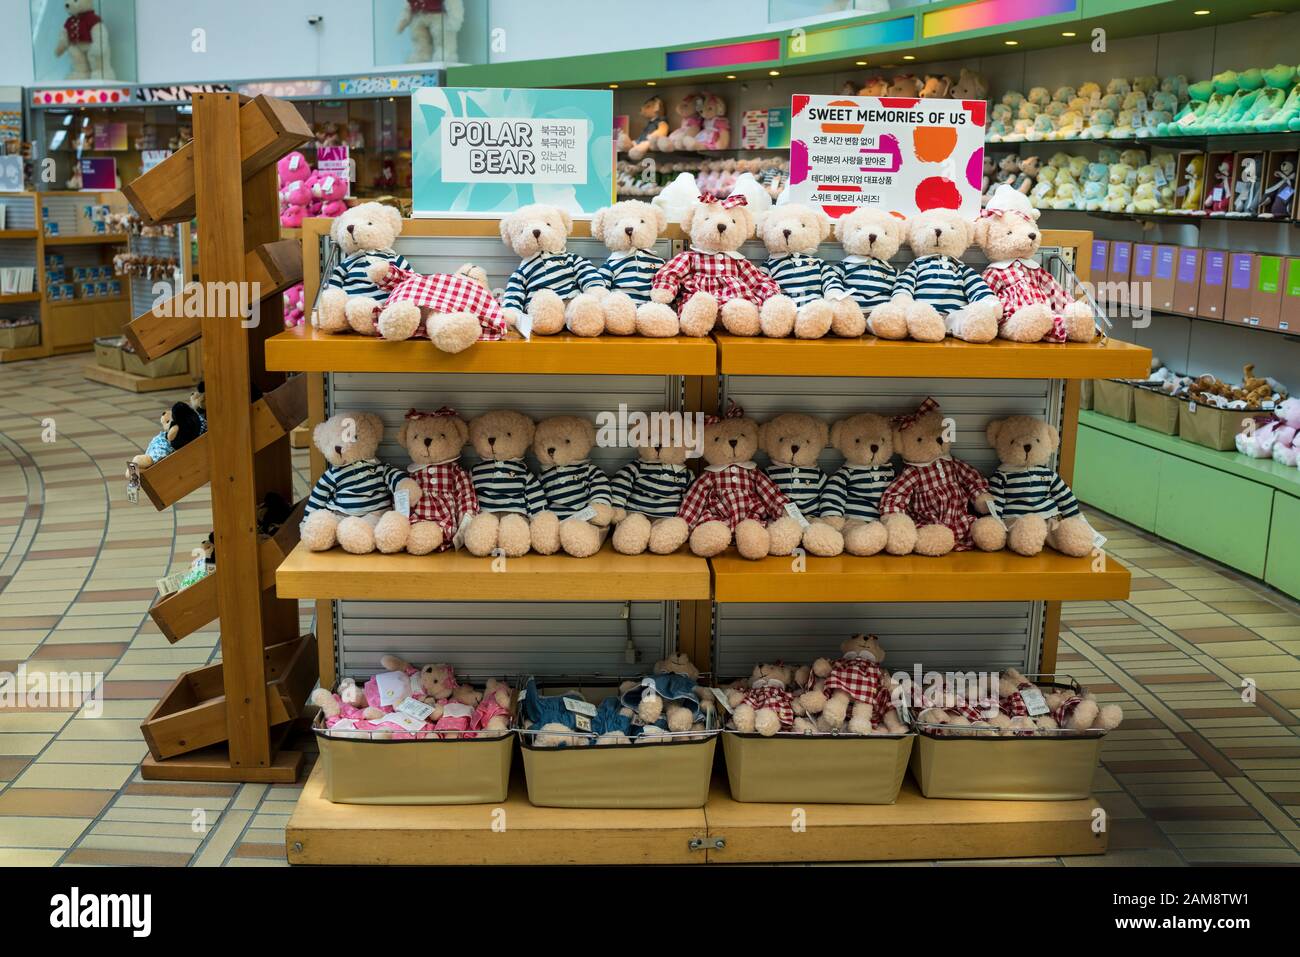 Jeju Teddy Bear Museum in Jungmun - Tours and Activities